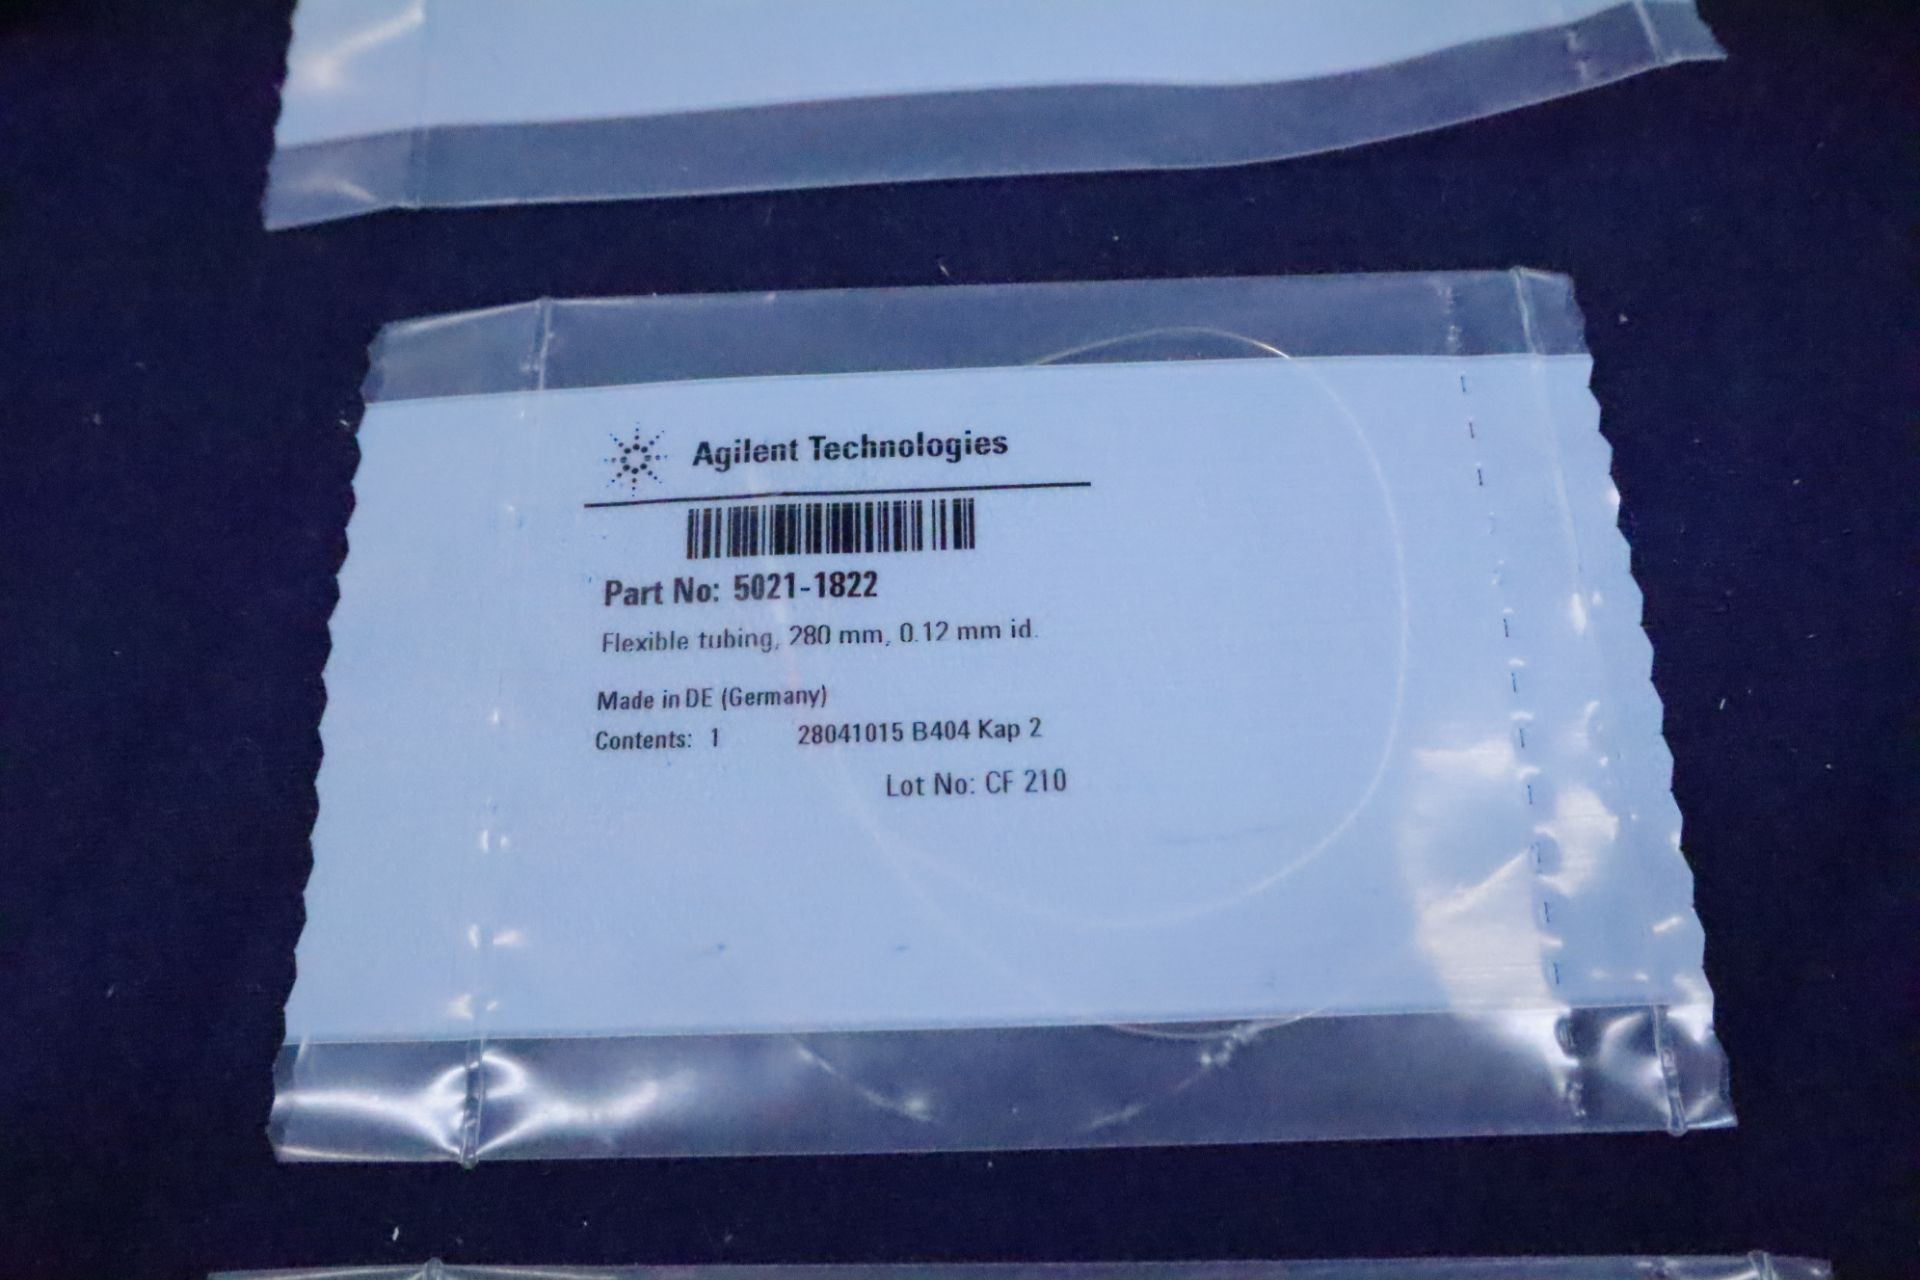 Agilent Technologies OEM Replacement Parts, Booklets and Recovery Drive - Image 16 of 32